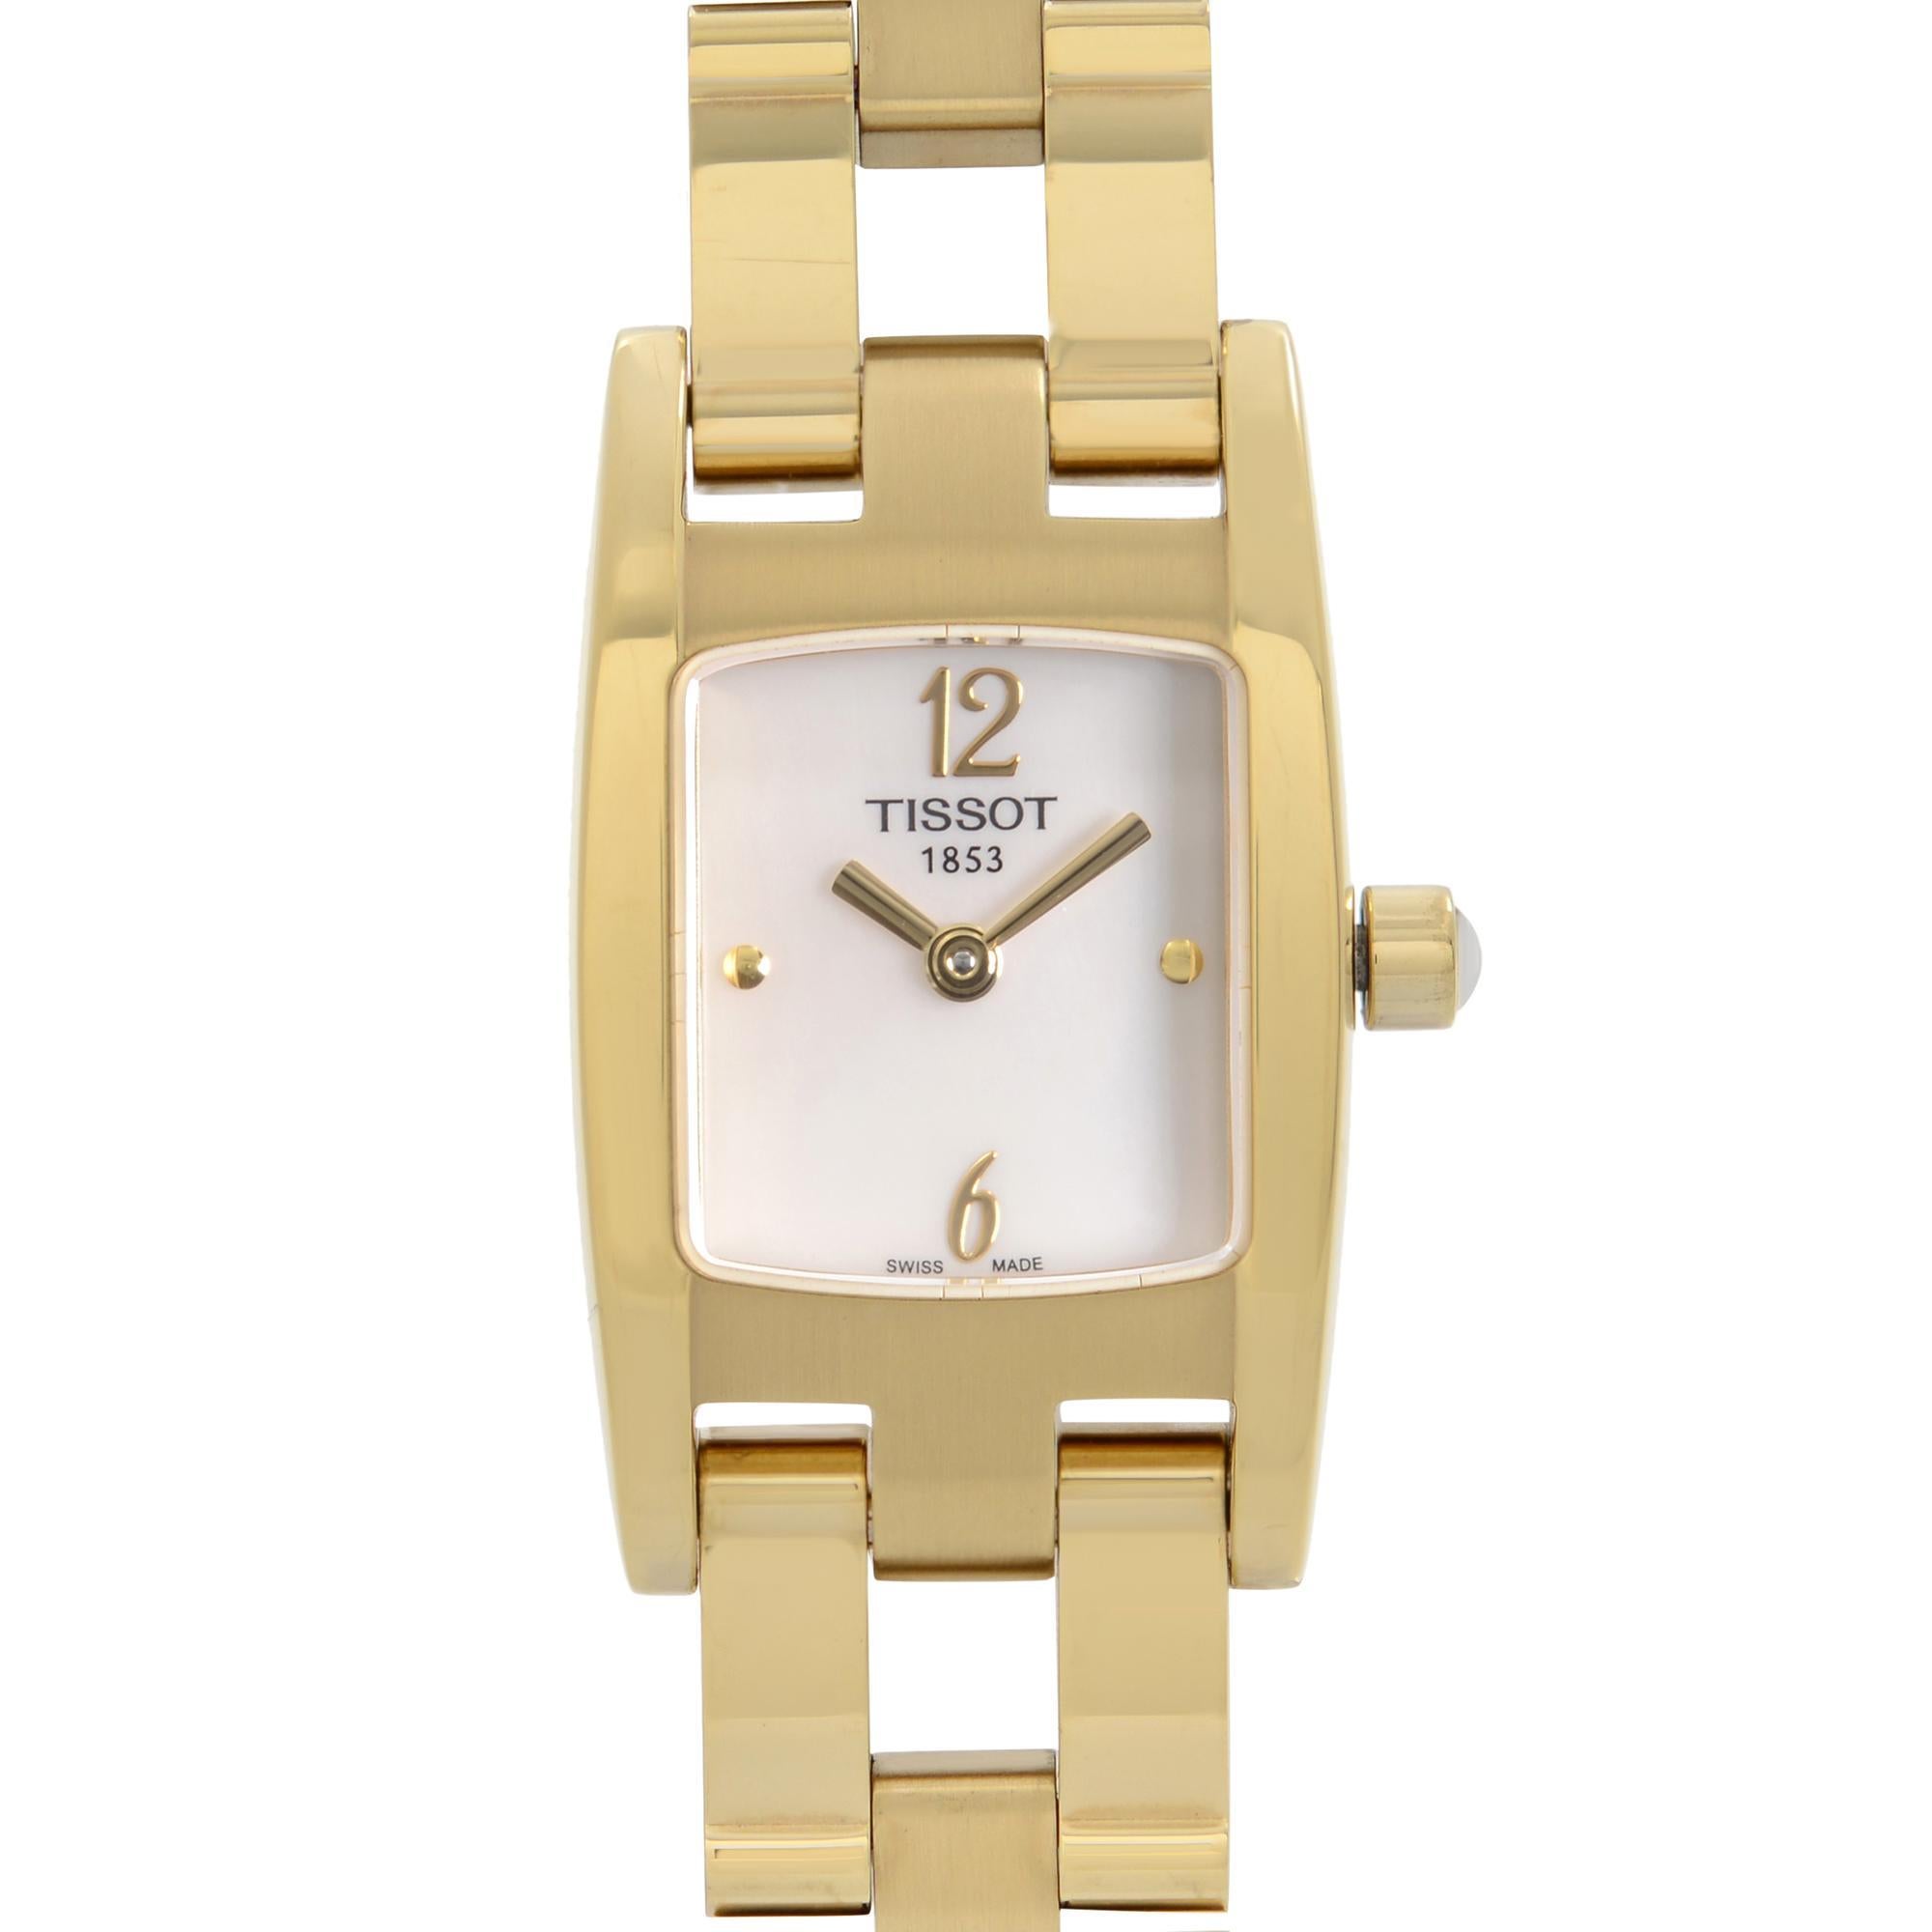 Pre-owned Tissot Trend T3 18mm Stainless Steel Mother of Pearl Dial Ladies Quartz Watch T042.109.33.117.00. Minor Scratches and Nicks on the Case and Bracelet. This timepiece is powered by Quartz (battery) movement with features: Gold-tone Stainless